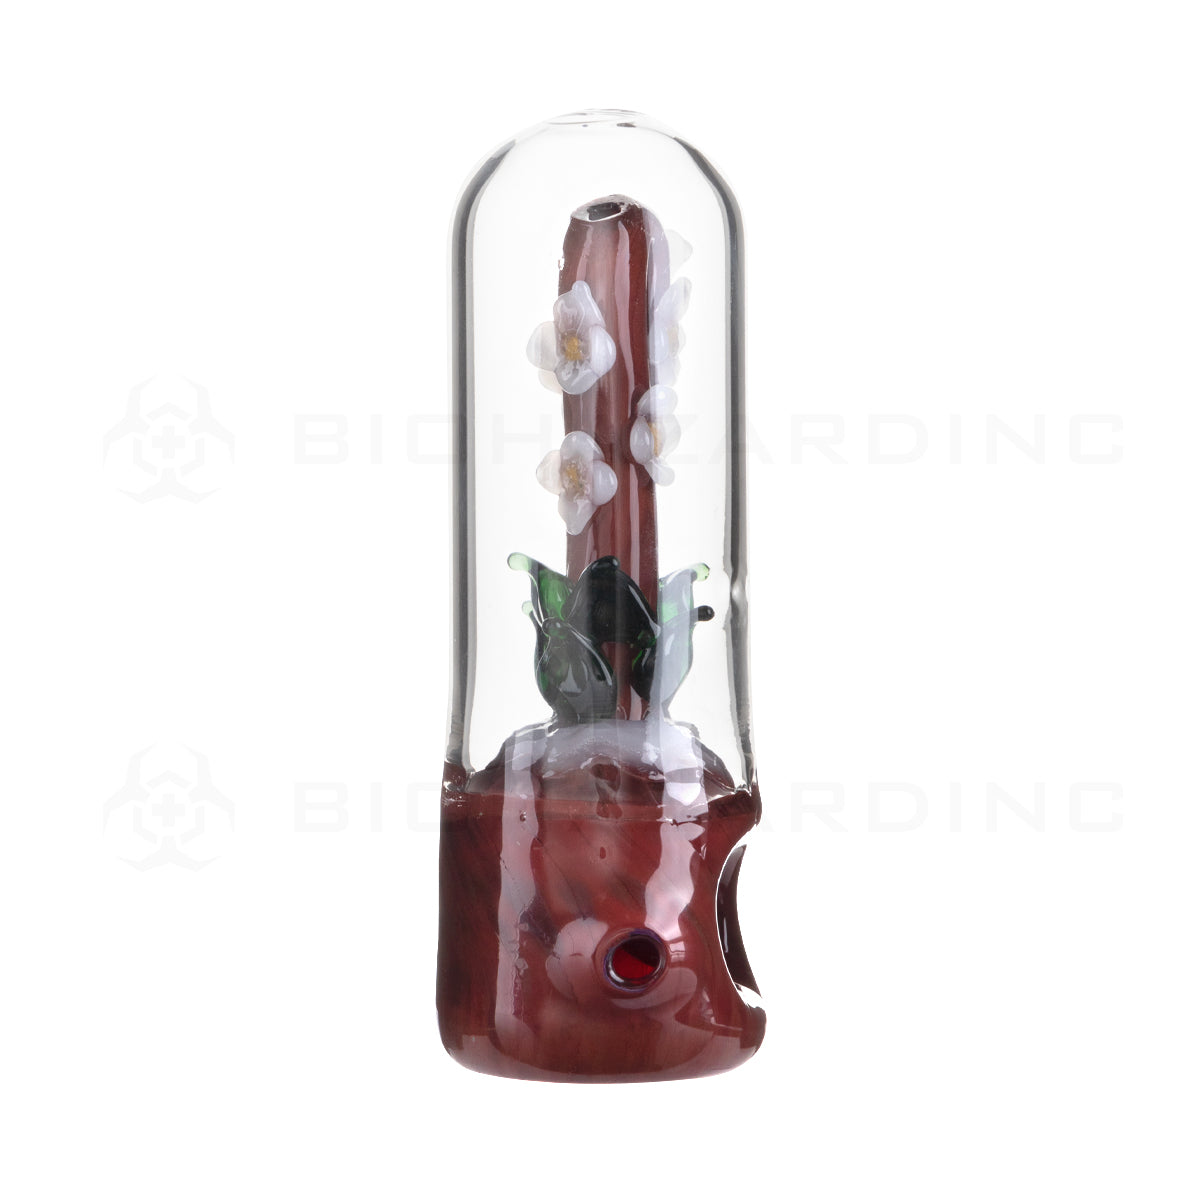 Novelty | Flower in Glass Dome Hand Pipe | 5" - Glass - Red Novelty Hand Pipe Biohazard Inc   